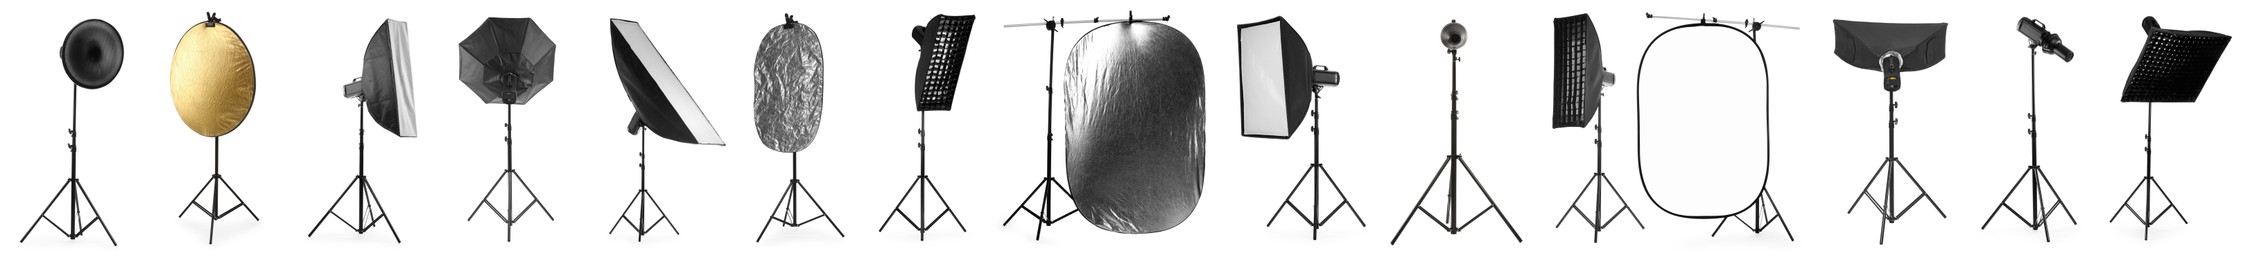 Set of different professional photo studio equipment isolated on white